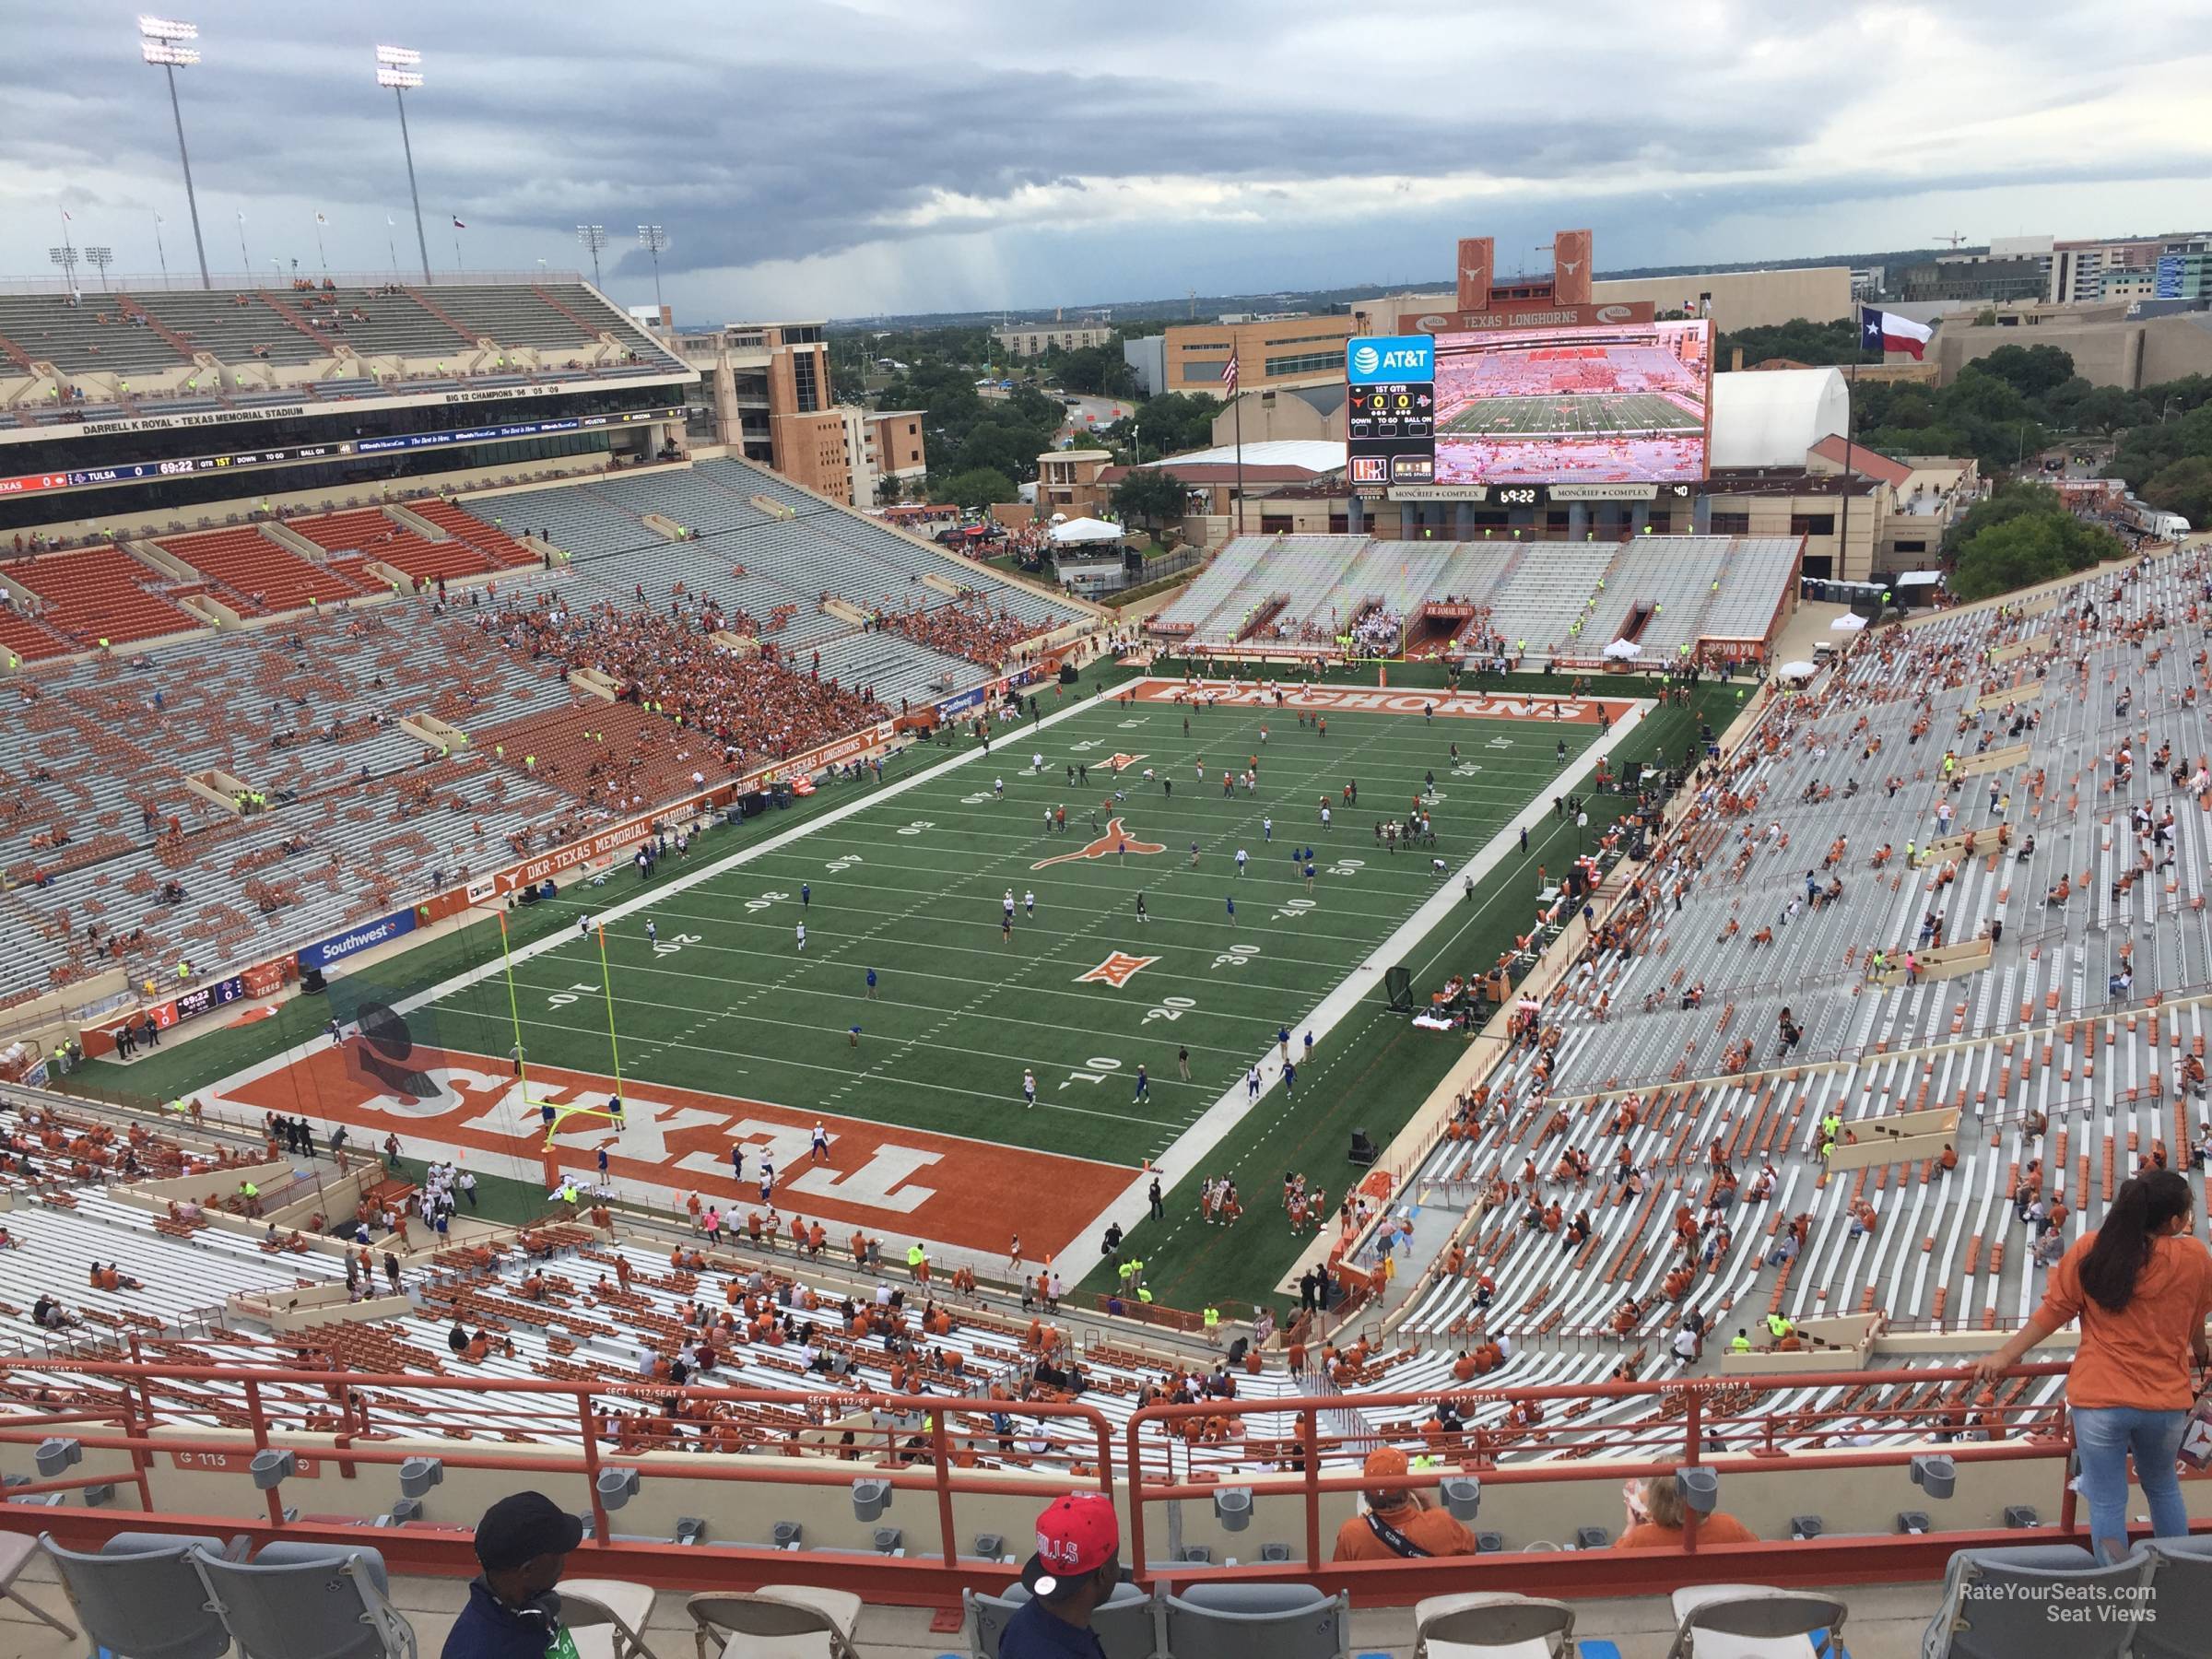 section 112, row 10 seat view  - dkr-texas memorial stadium